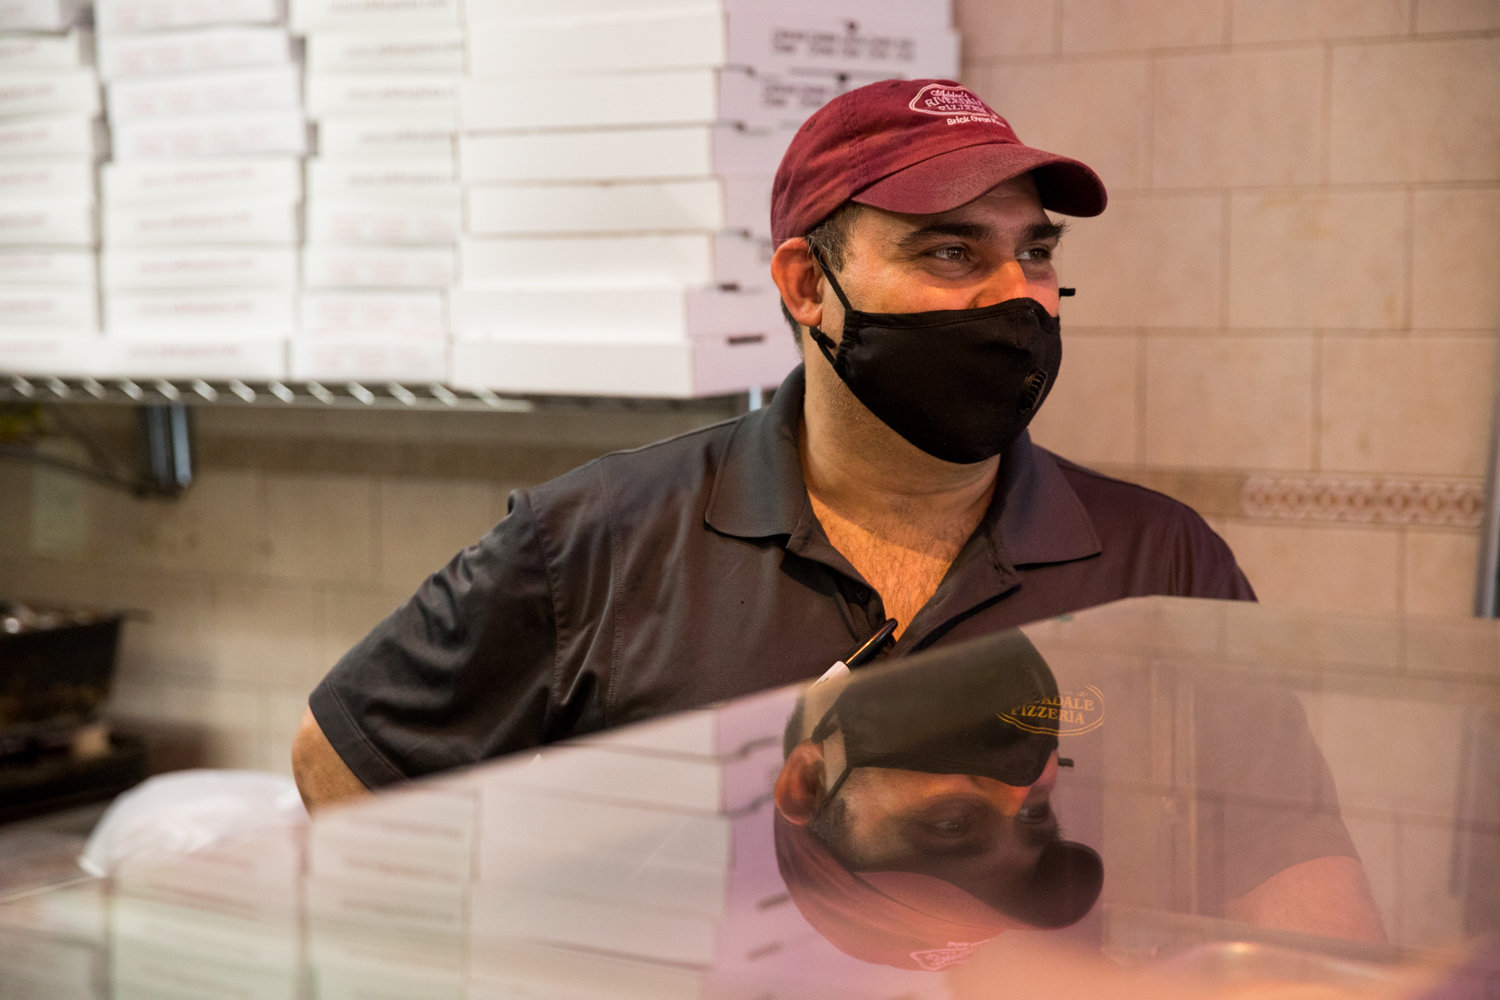 When he isn’t serving pizza, Addeo’s Riverdale Pizza manager Jody DePasquale is doing what he can to help customers — whether it’s walking dogs or withdrawing money out of an ATM. DePasquale has taken on these responsibilities as a result of the coronavirus pandemic that has forced many people to stay home.